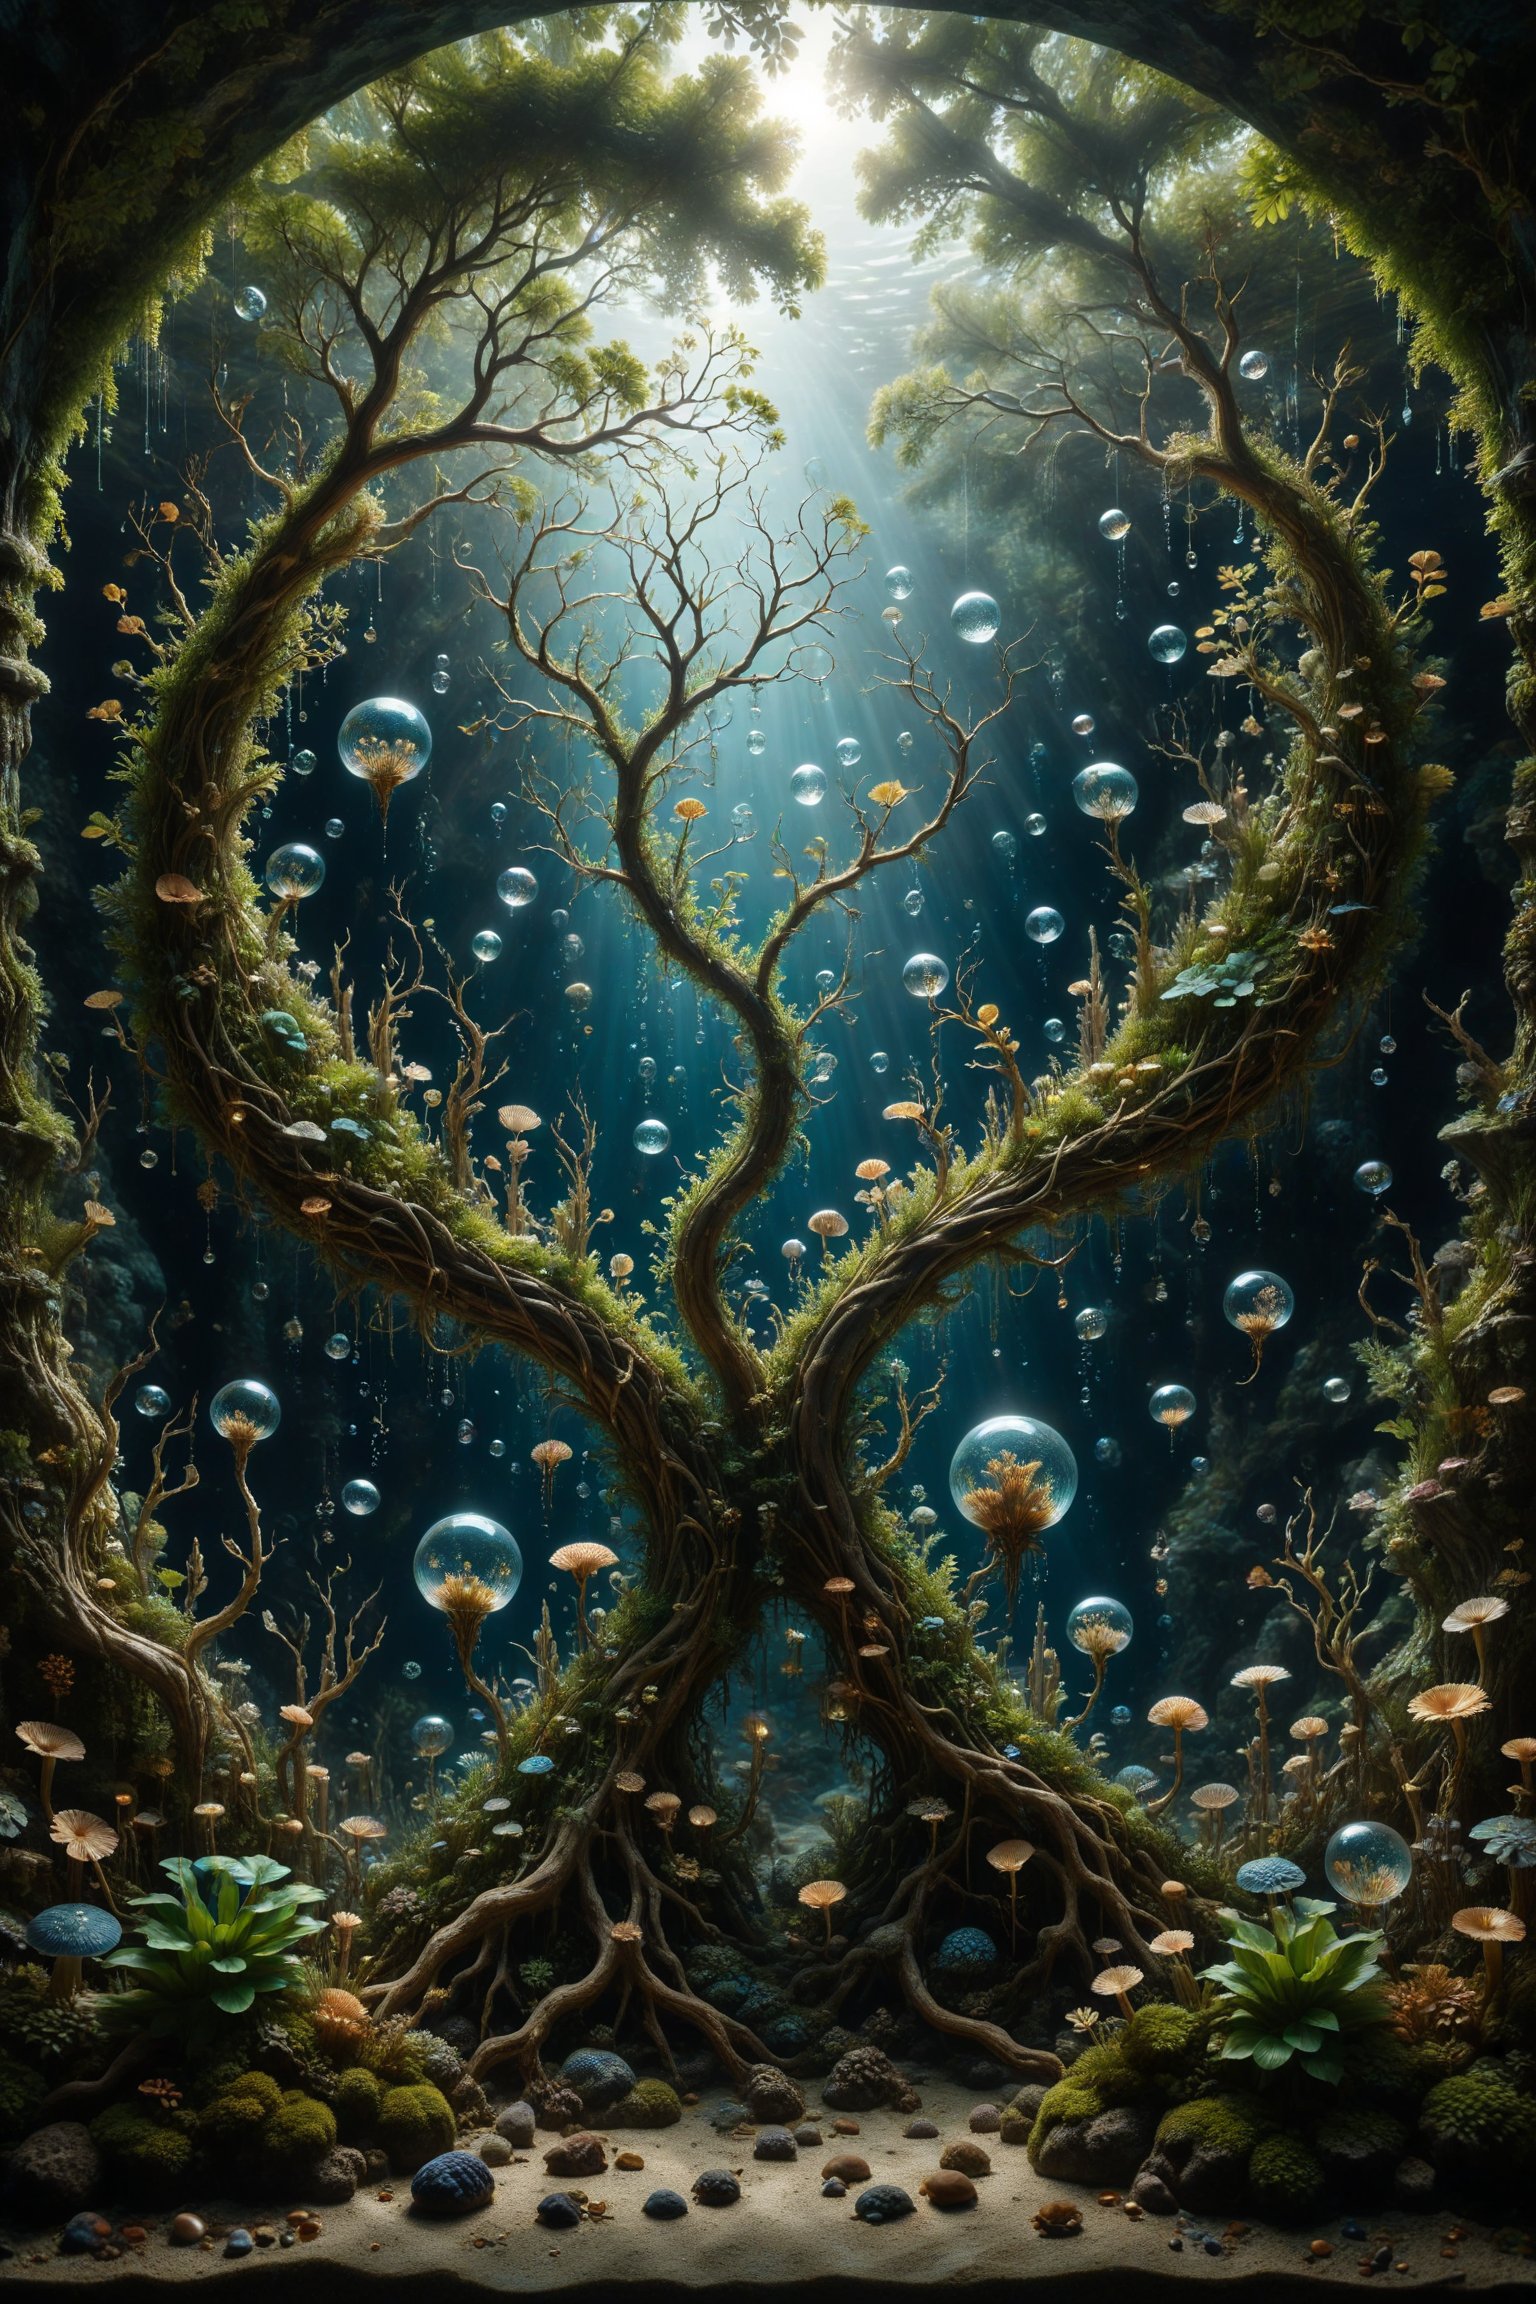 An aquarium with interesting, surreal organic curves, representing an underwater forest with candelabras resembling submerged tree branches. Inlaid aquatic plants, decorative gold accents, feathers, diamonds, and iridescent bubbles.